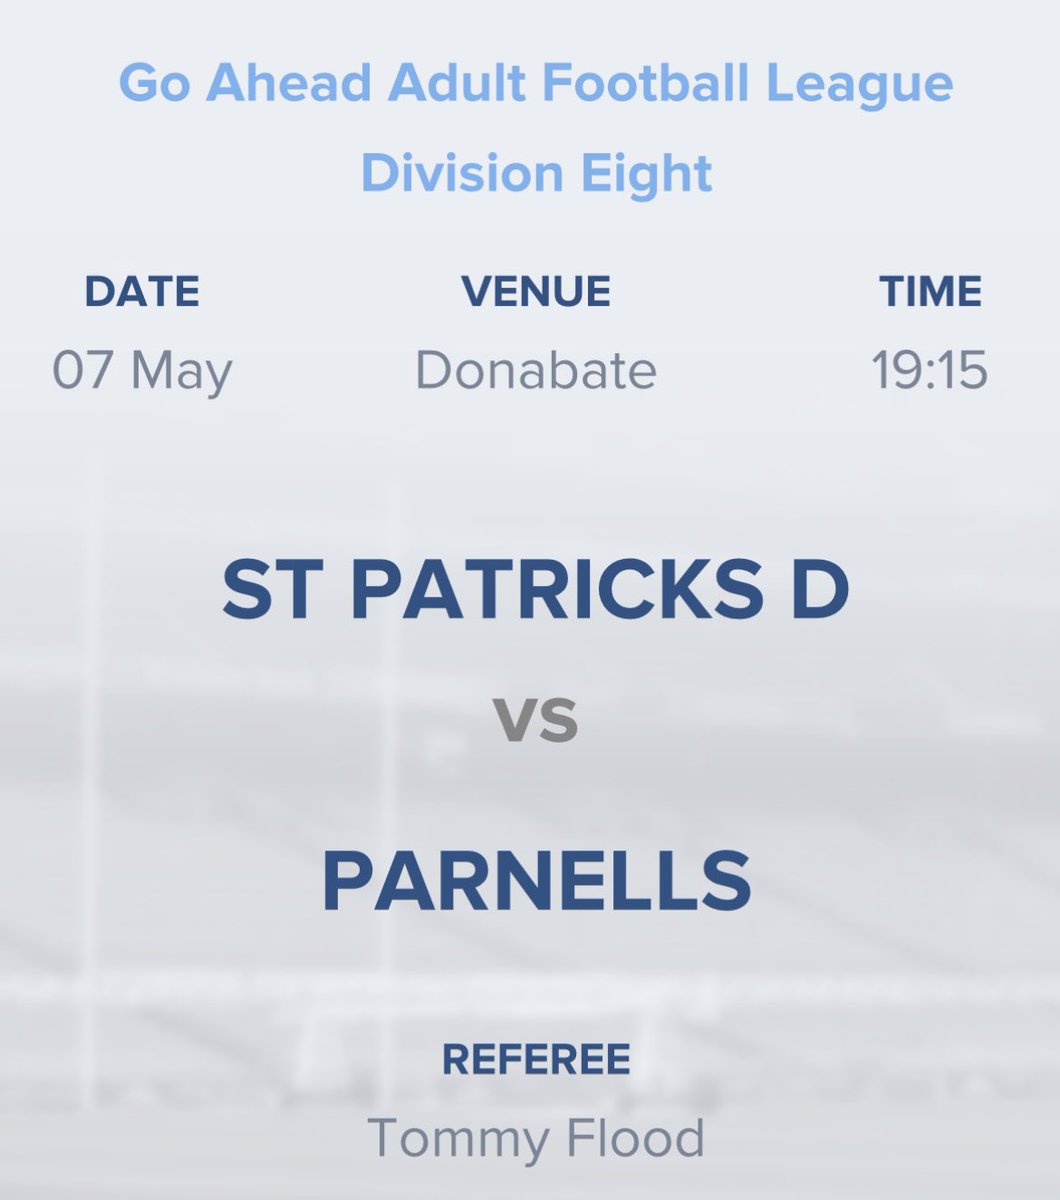 Adult Football League Division 8
St Pats Donabate v Parnells

📅 Tuesday May 7th
⏰ 7:15 pm
📍 Donabate

Best of luck to the players and mentors.
#upthenells